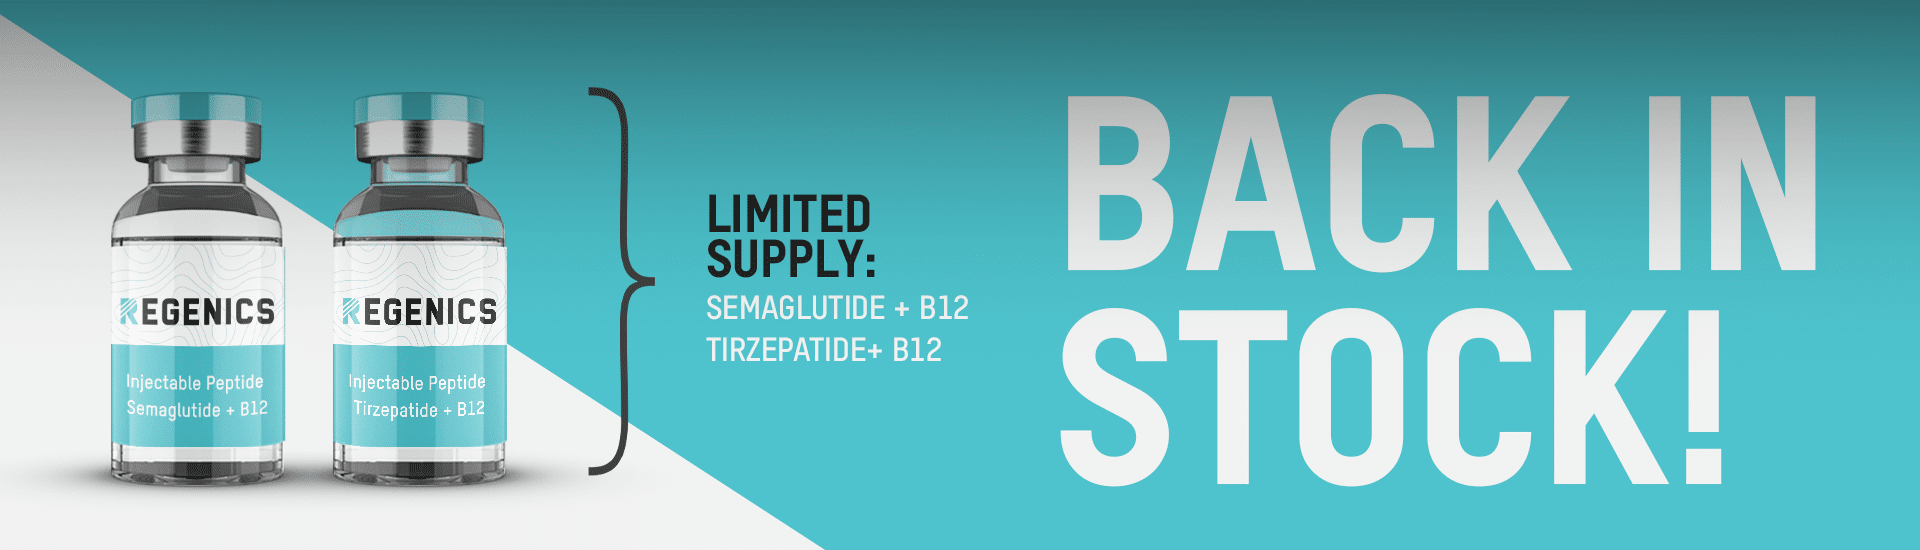 Two vials of Regenics peptide, branded Semaglutide + B12 and Tirzepatide + B12, are placed next to the text "Limited Supply" and "BACK IN STOCK!" on a blue and white background. Reward Yourself with these rejuvenating treatments while supplies last!